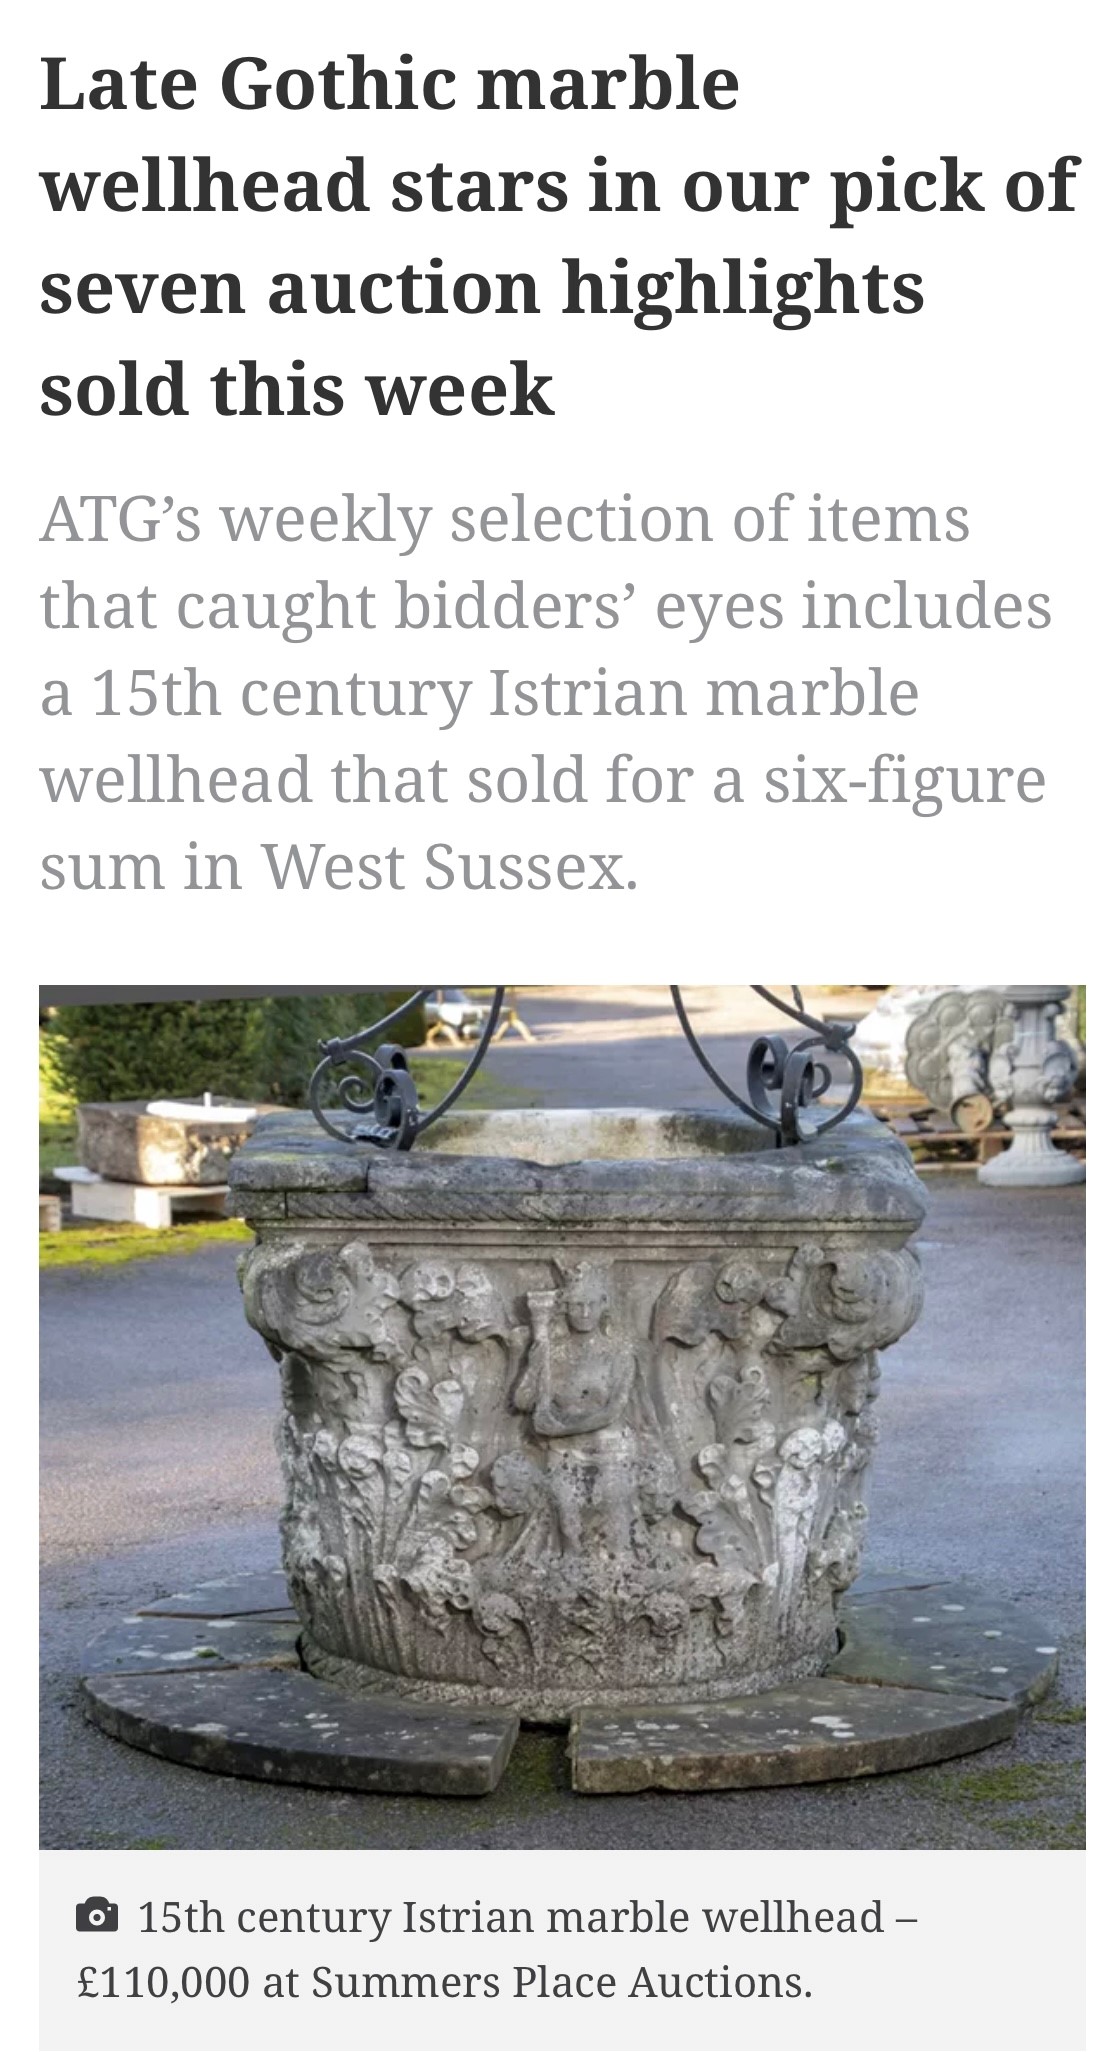 Late Gothic marble wellhead stars in our pick of seven auction highlights sold this week - ATG, 1 April, 2022